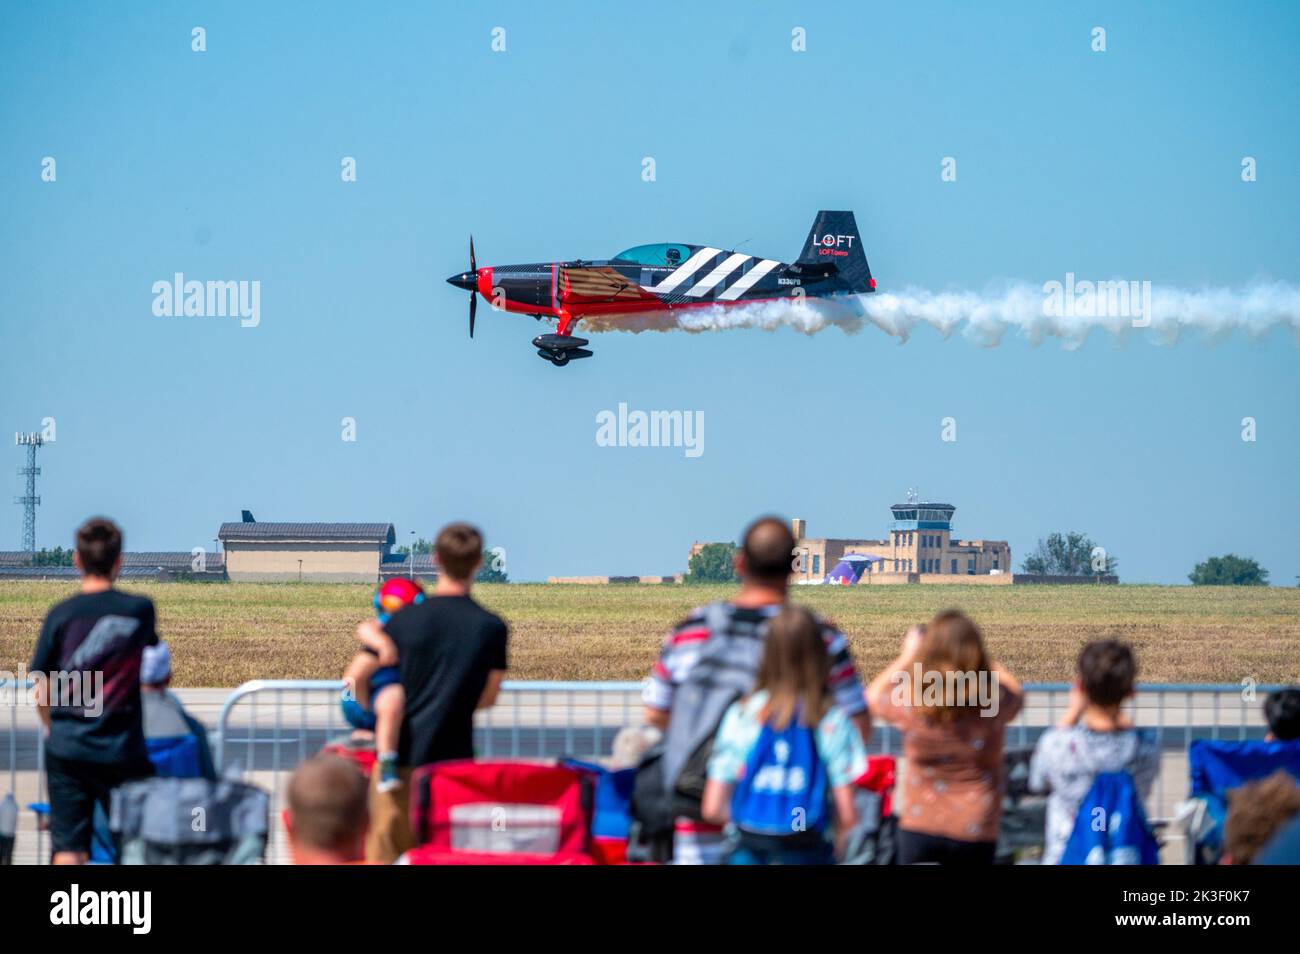 Adam Shakenbake Baker performs aerobatics in his Extra-330 aircraft during the 2022 Frontiers in Flight Air Show at McConnell Air Force Base, September 24, 2022 in Wichita, Kansas. Stock Photo